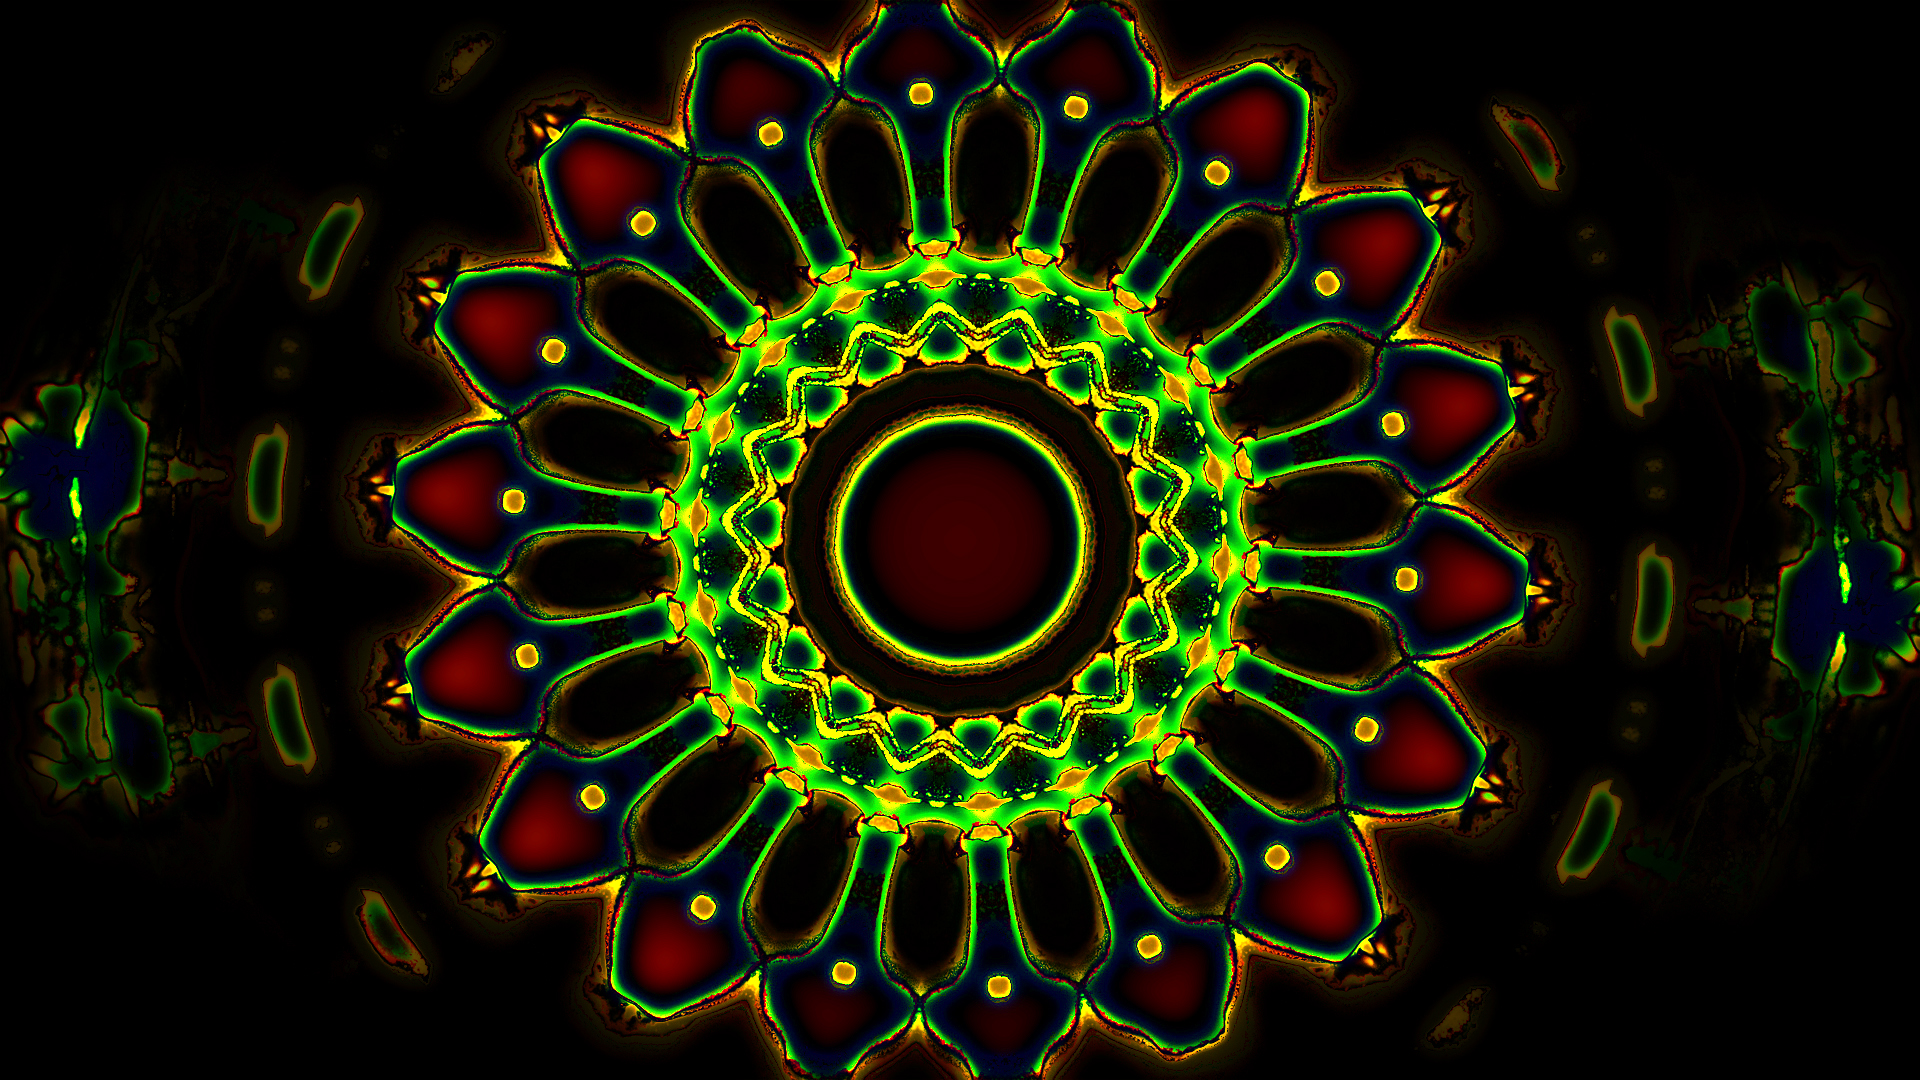 Psychedelic Desktop Wallpaper Pc Android iPhone And iPad